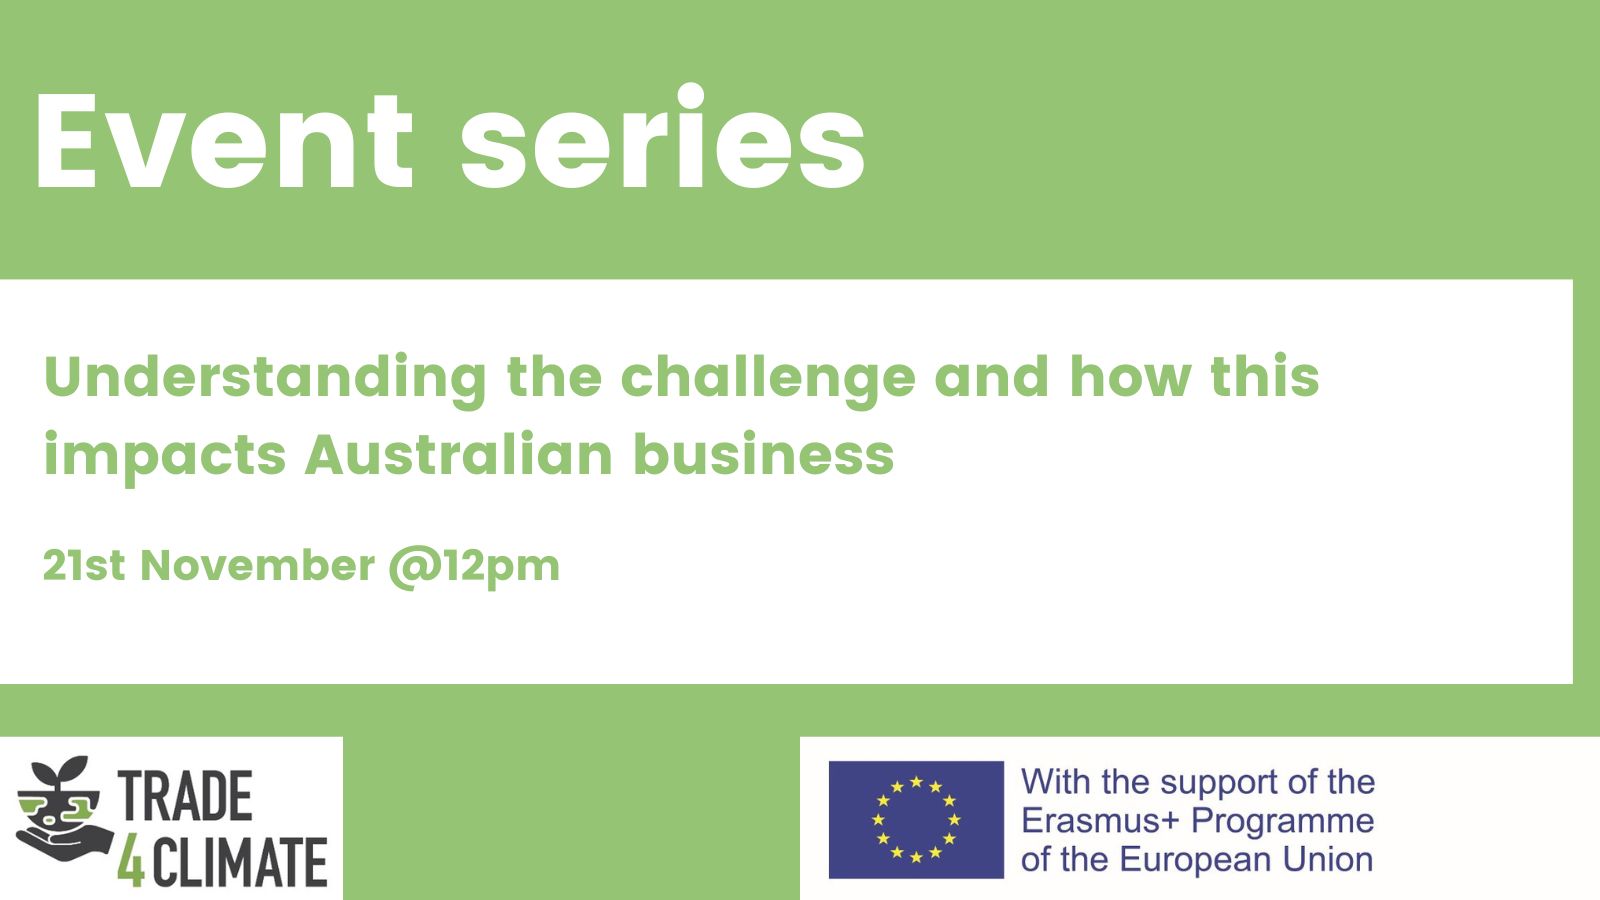 Webinar 1: Understanding the challenge and how this impacts Australian business